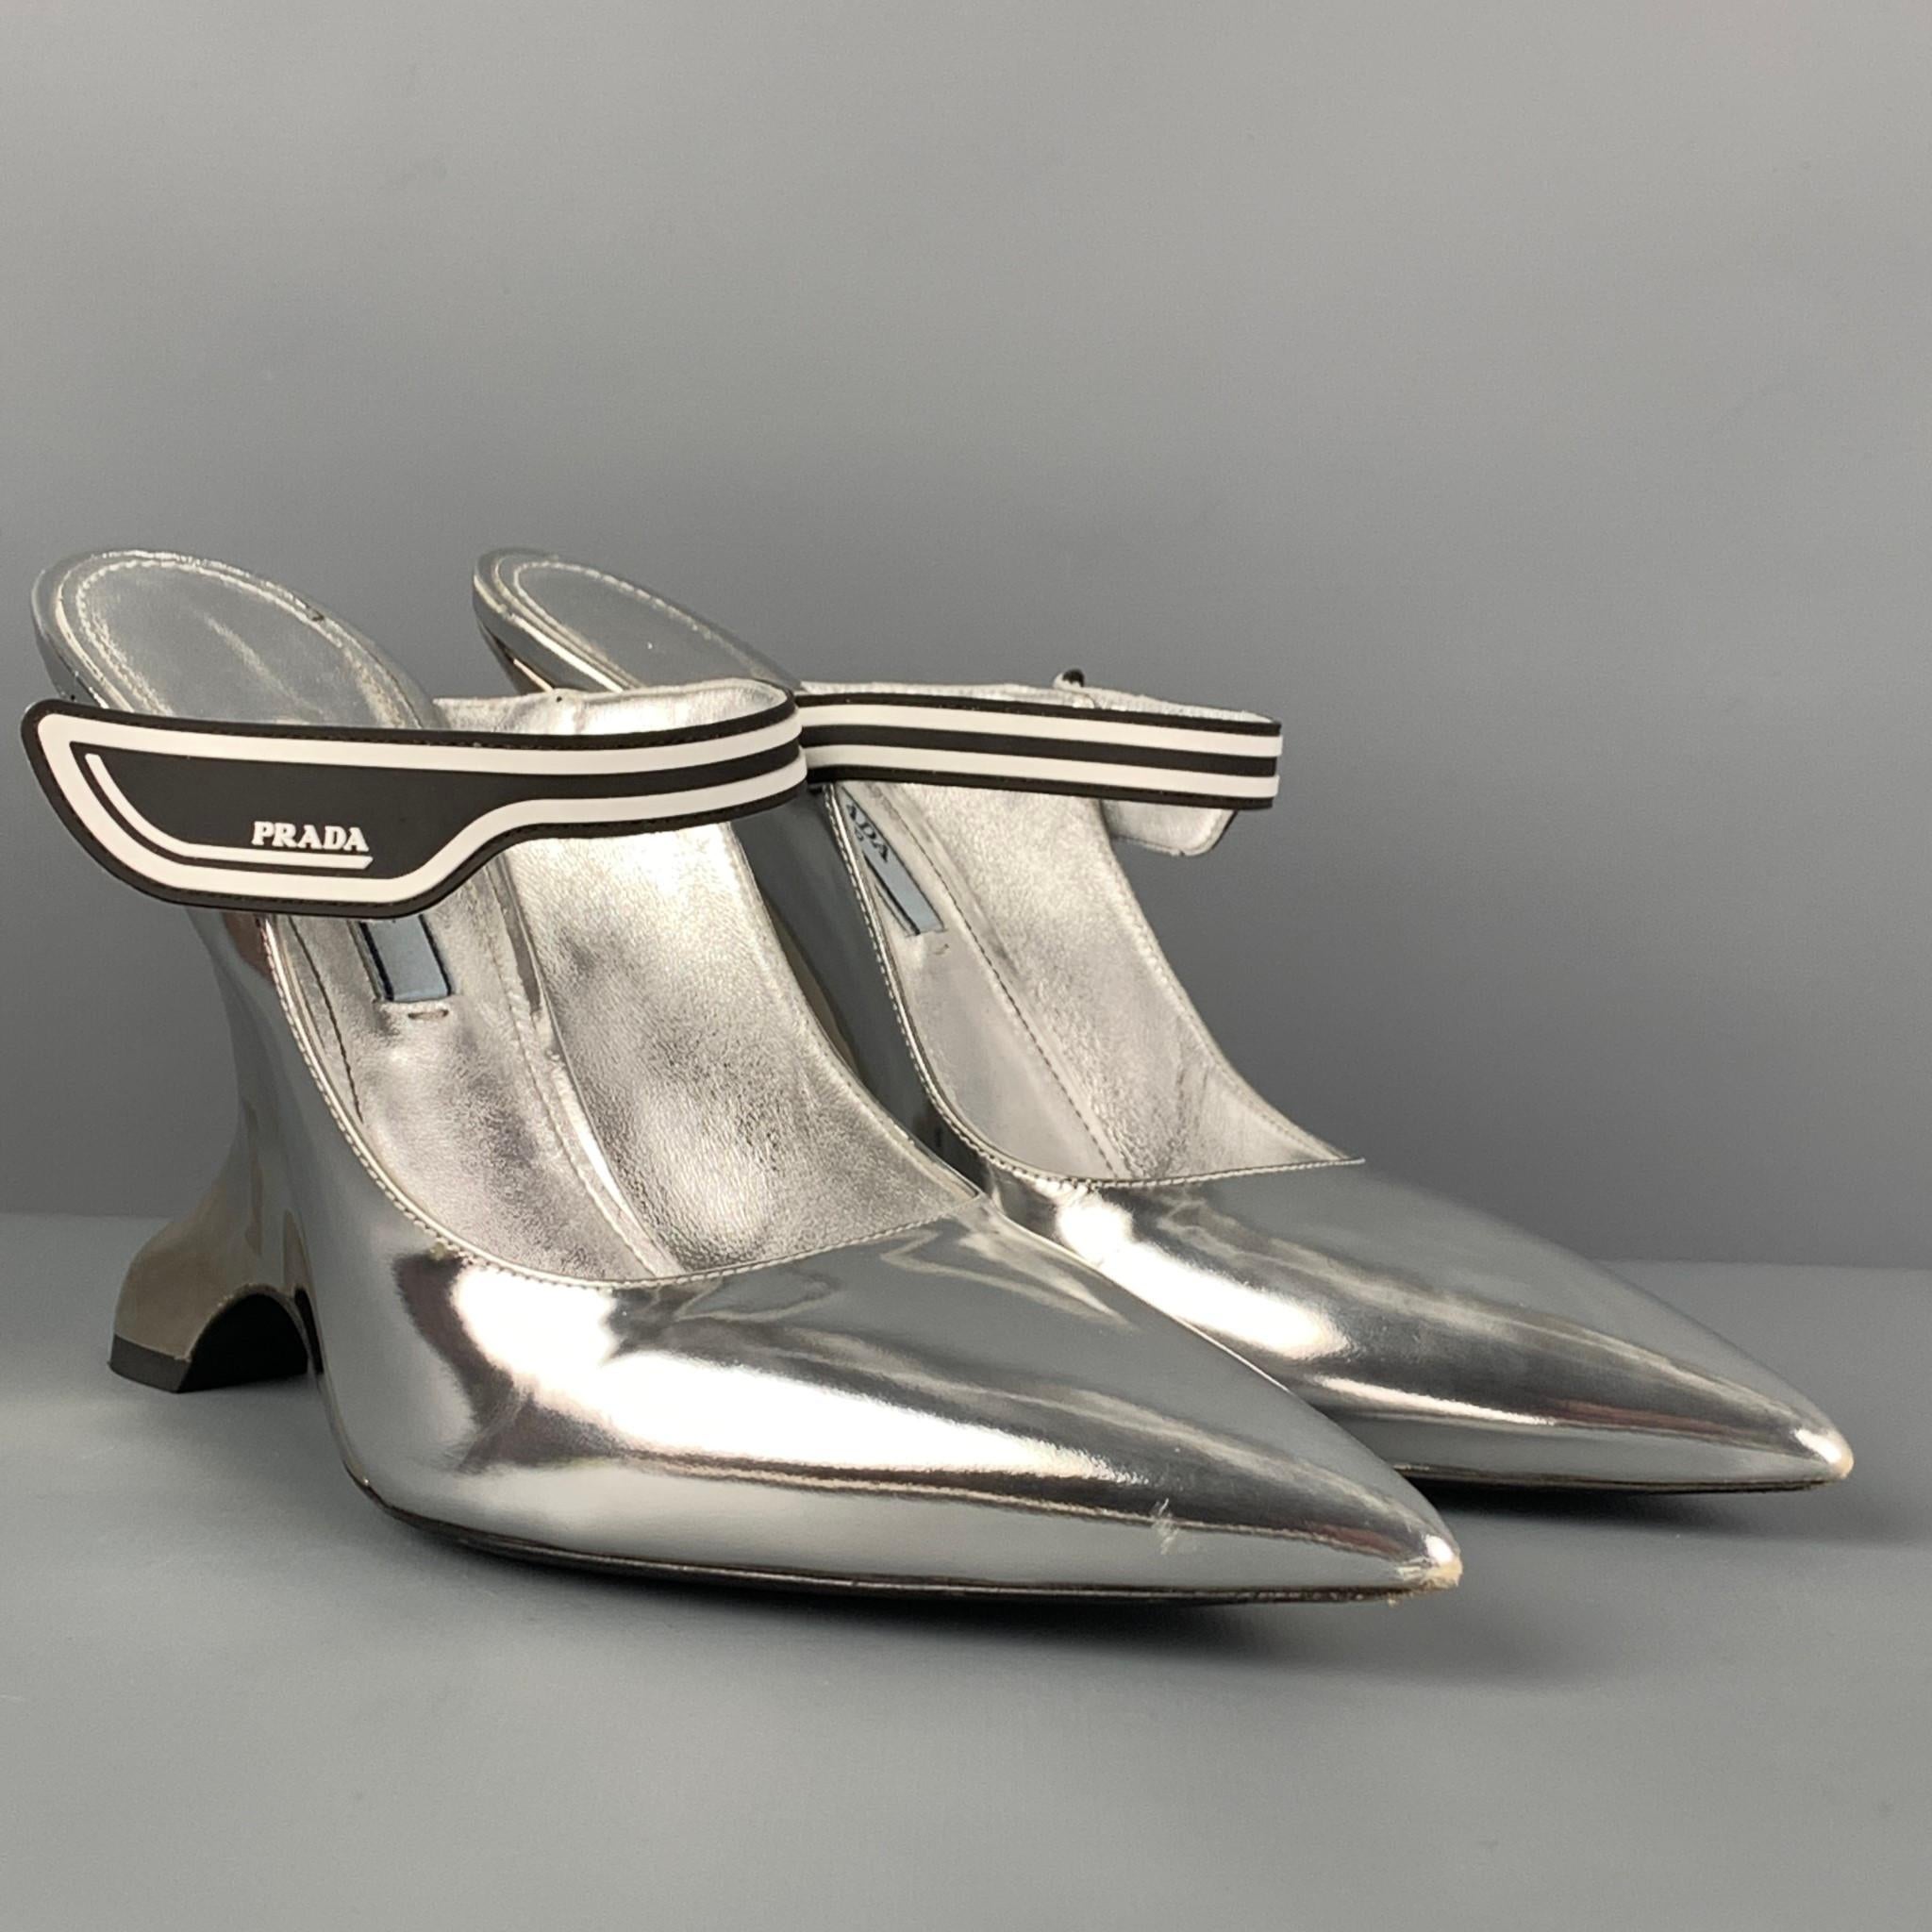 PRADA pumps comes in a silver metallic mirror-finish leather, pointed toe, contrast logo rubber strap, and a sculptural heel. Made in Italy.

Very Good Pre-Owned Condition.
Marked: 37.5
Original Retail Price: $950.00

Measurements:

Heel: 5 in. 